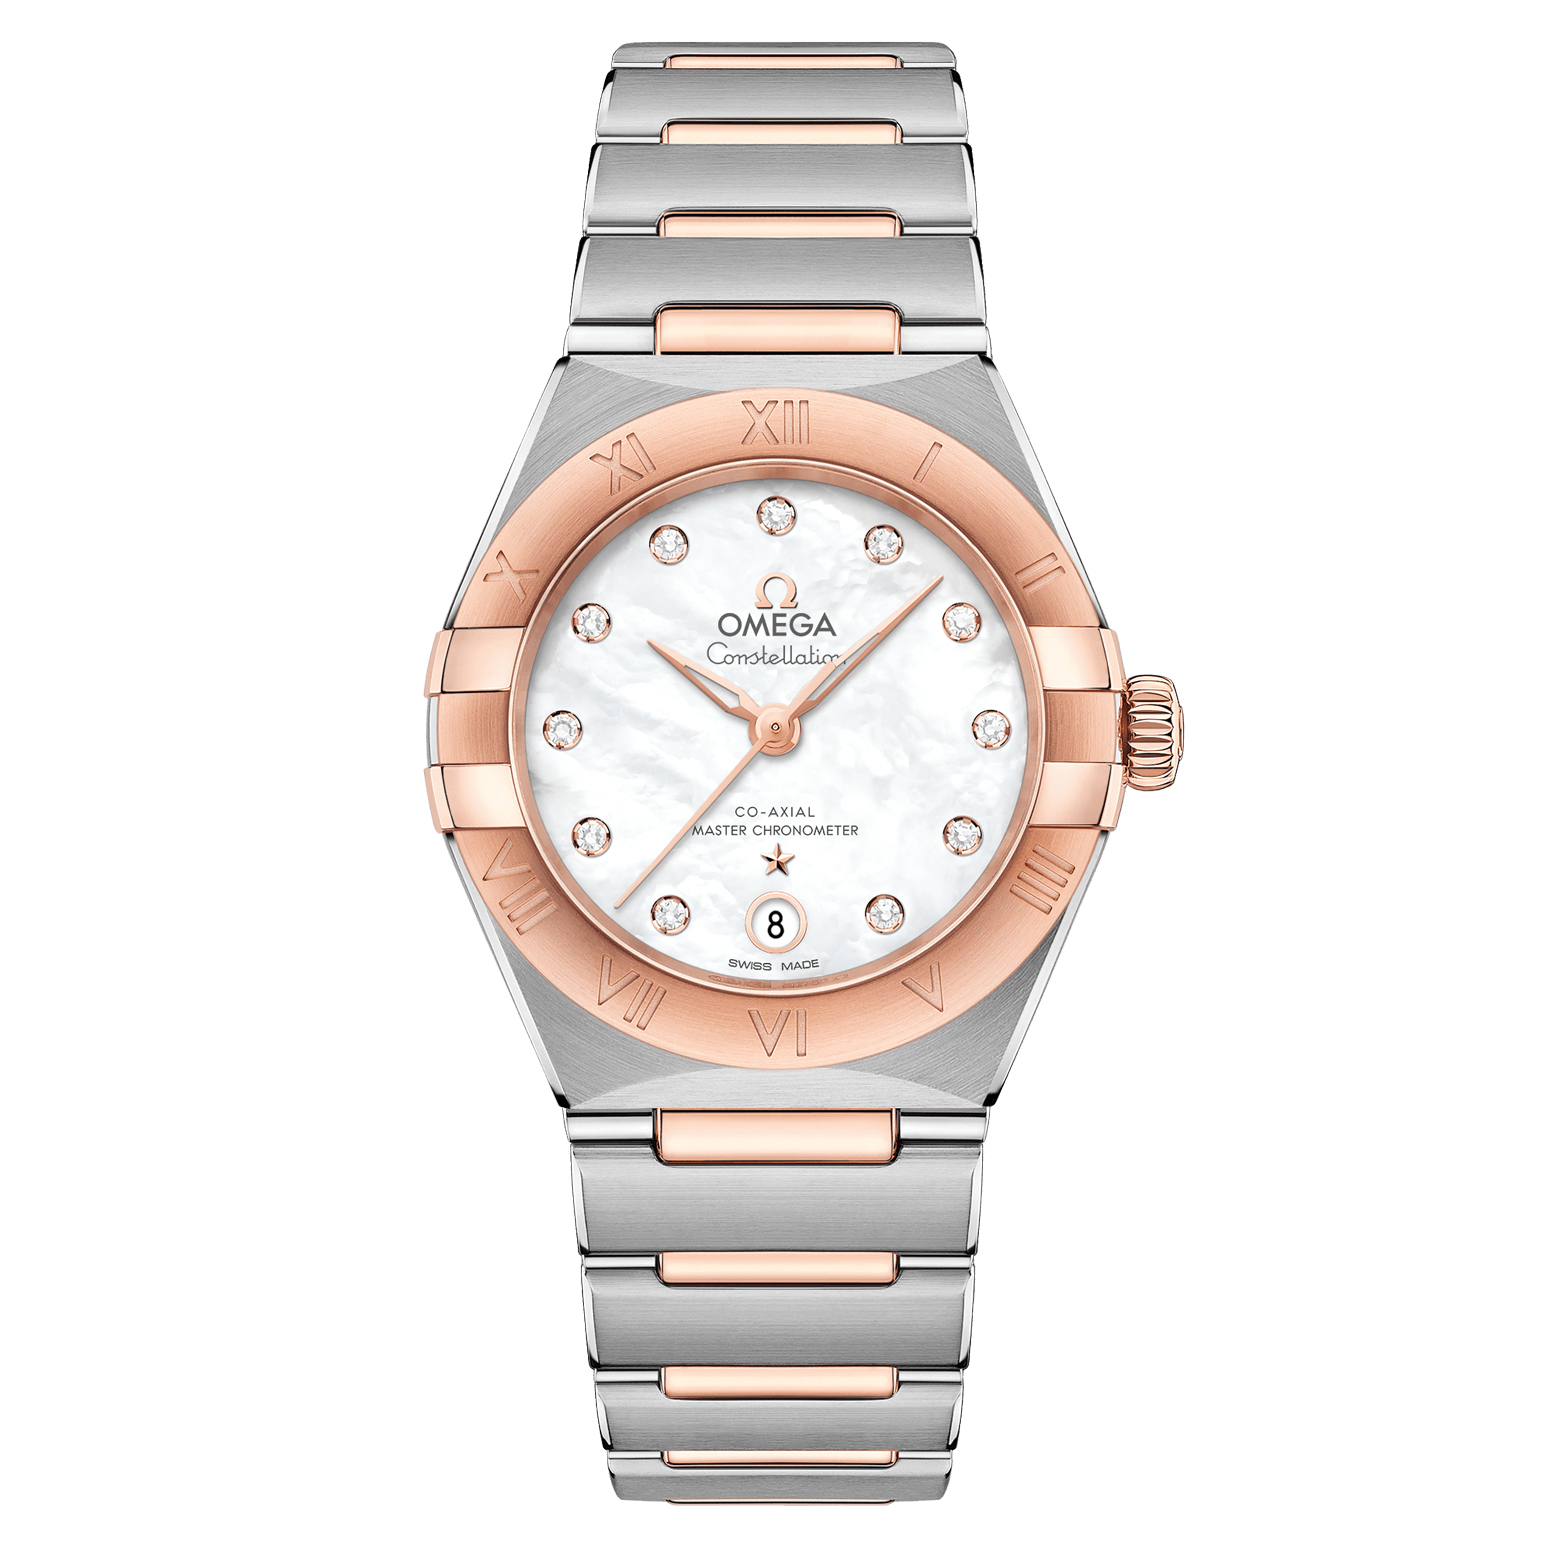 OMEGA Constellation Co-Axial Master Chronometer Diamond Dial Watch | 29mm | O13120292055001